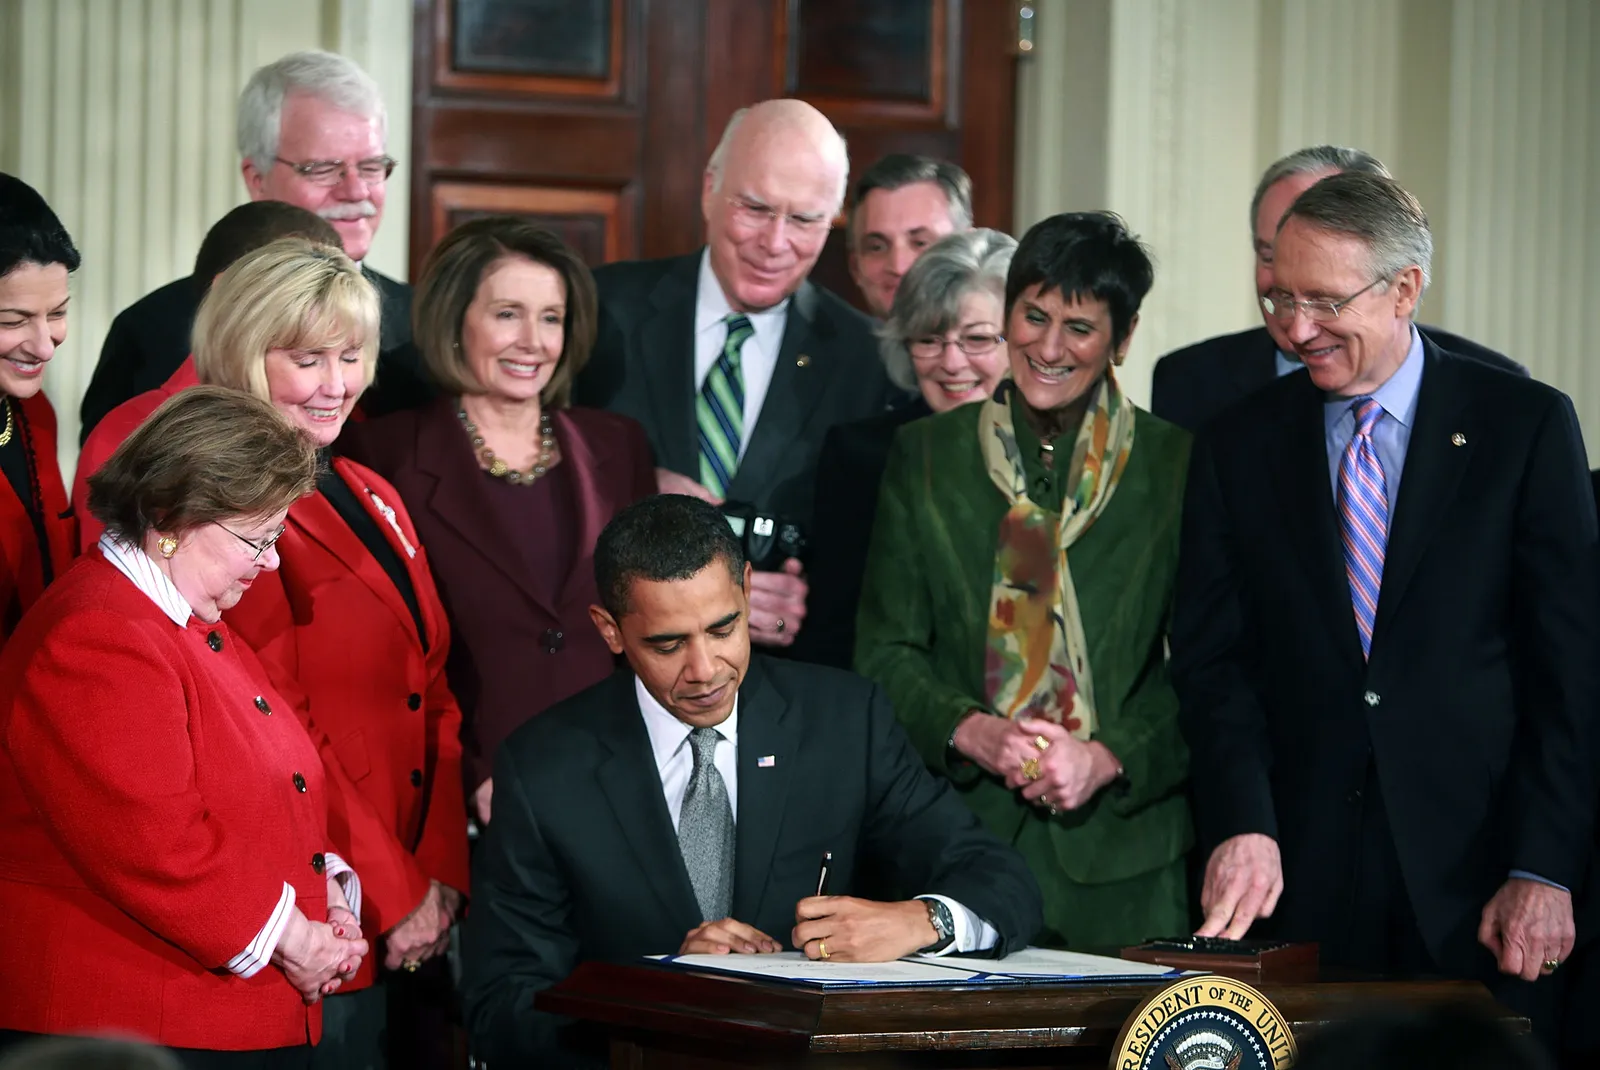 Surrounded by members of Congress, U.S. President Barack Obama signs the &quot;Lilly Ledbetter Fair Pay Act in the East Room of the White House on Jan. 29, 2009 in Washington, DC.